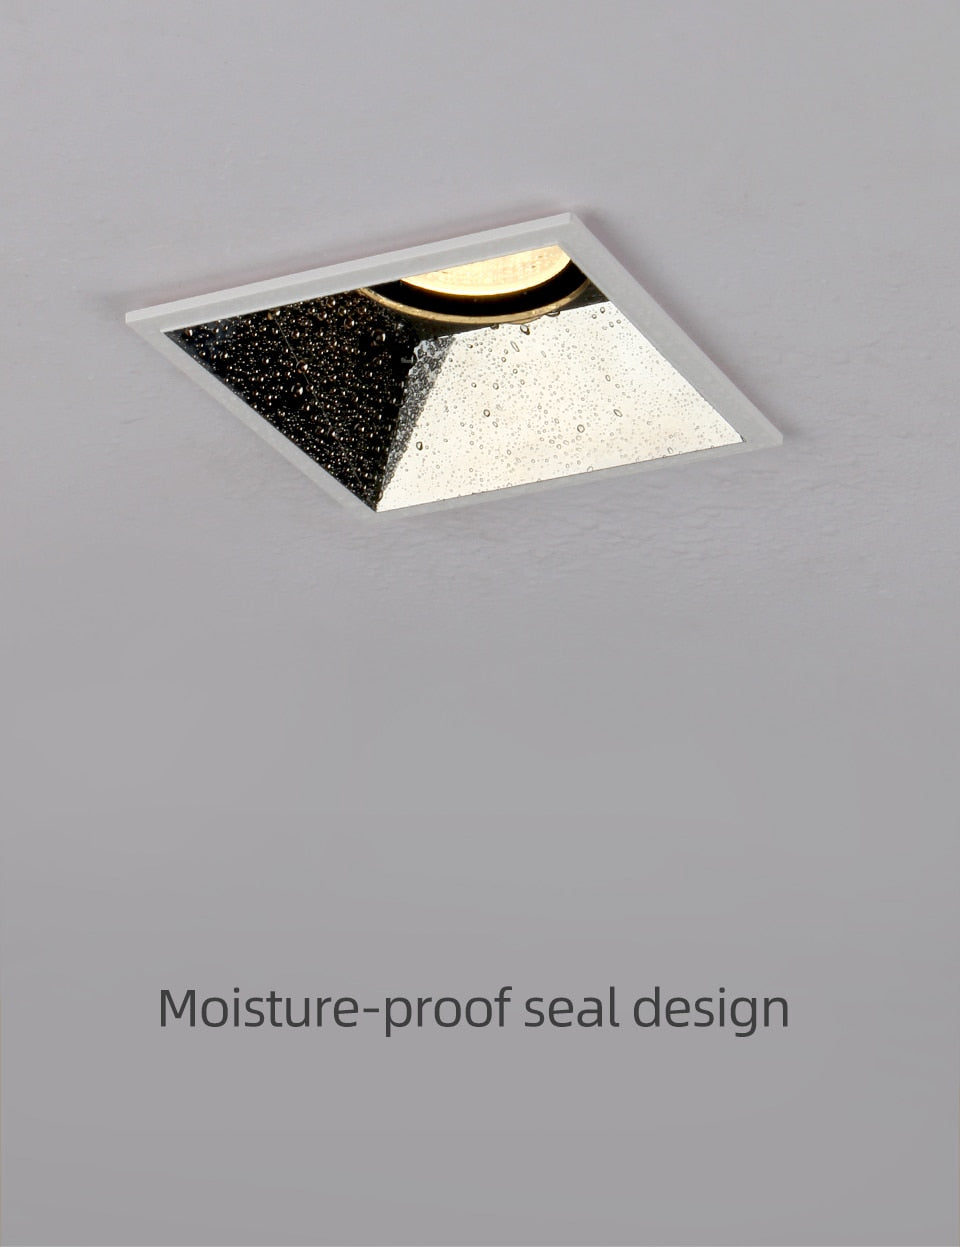 Aisilan LED square embedded spotlights home villas Narrow Border lamp downlights ceiling openings ceiling lights CRI 93